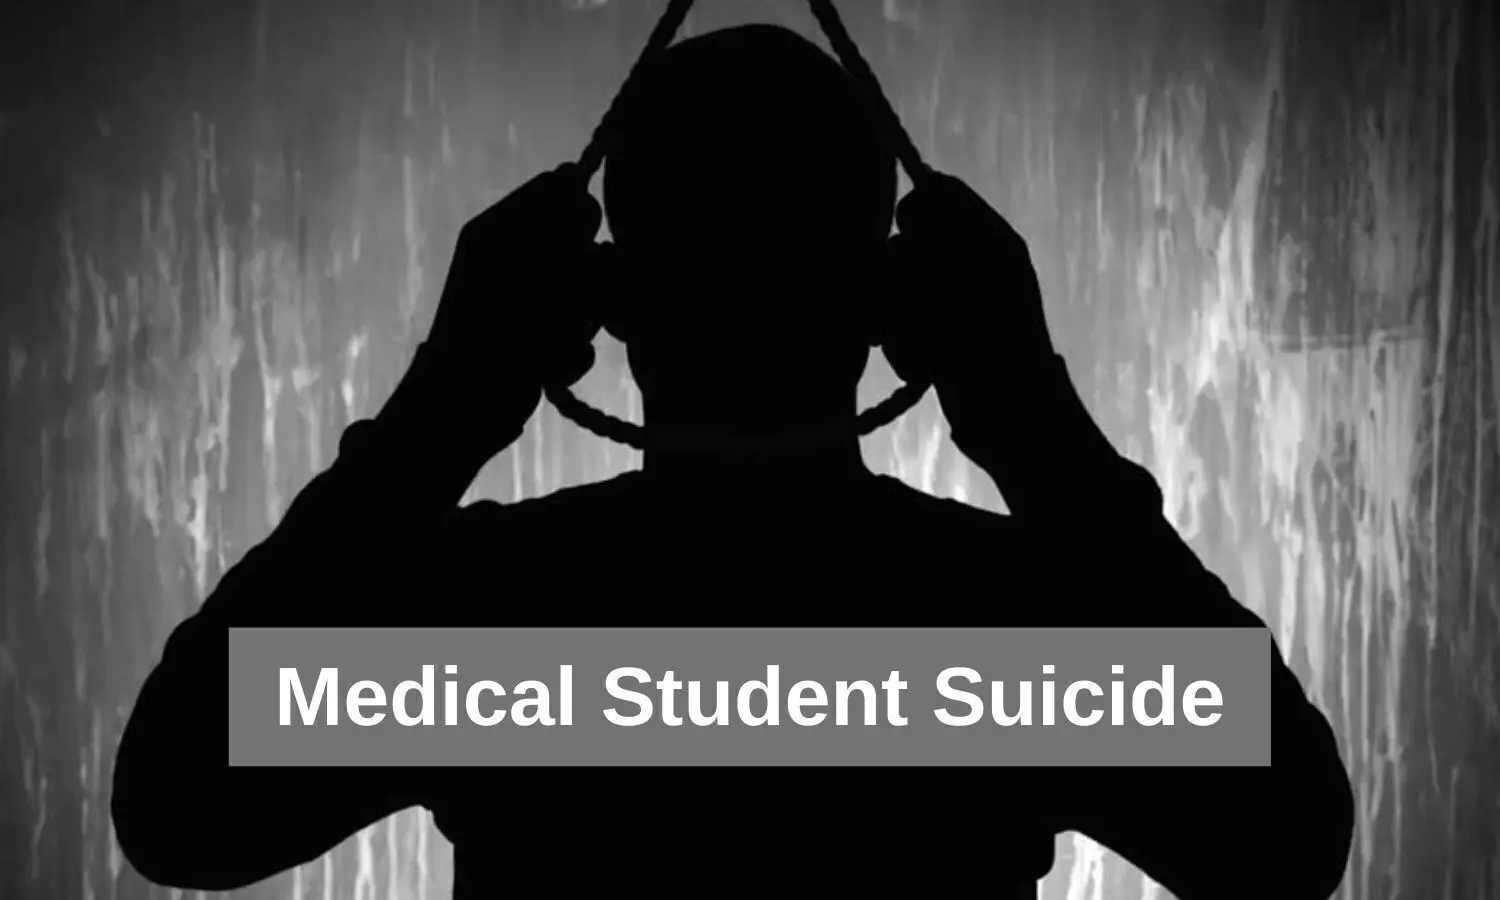 Ludhiana: CMCH Physiotherapy student ends life, apologizes to parents in suicide note